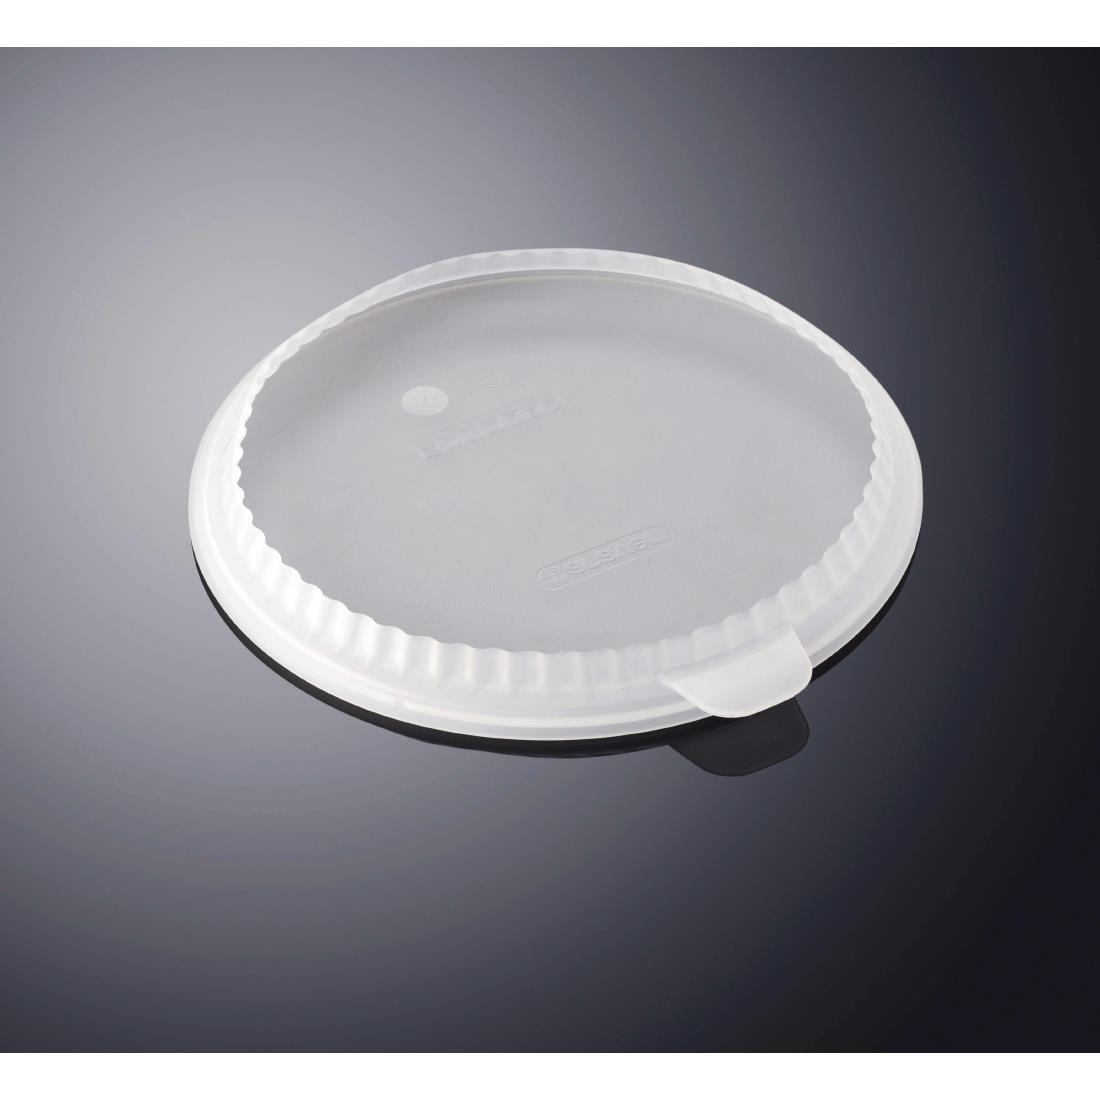 Araven Round Silicone Lid Clear 133mm - FP930  - 2